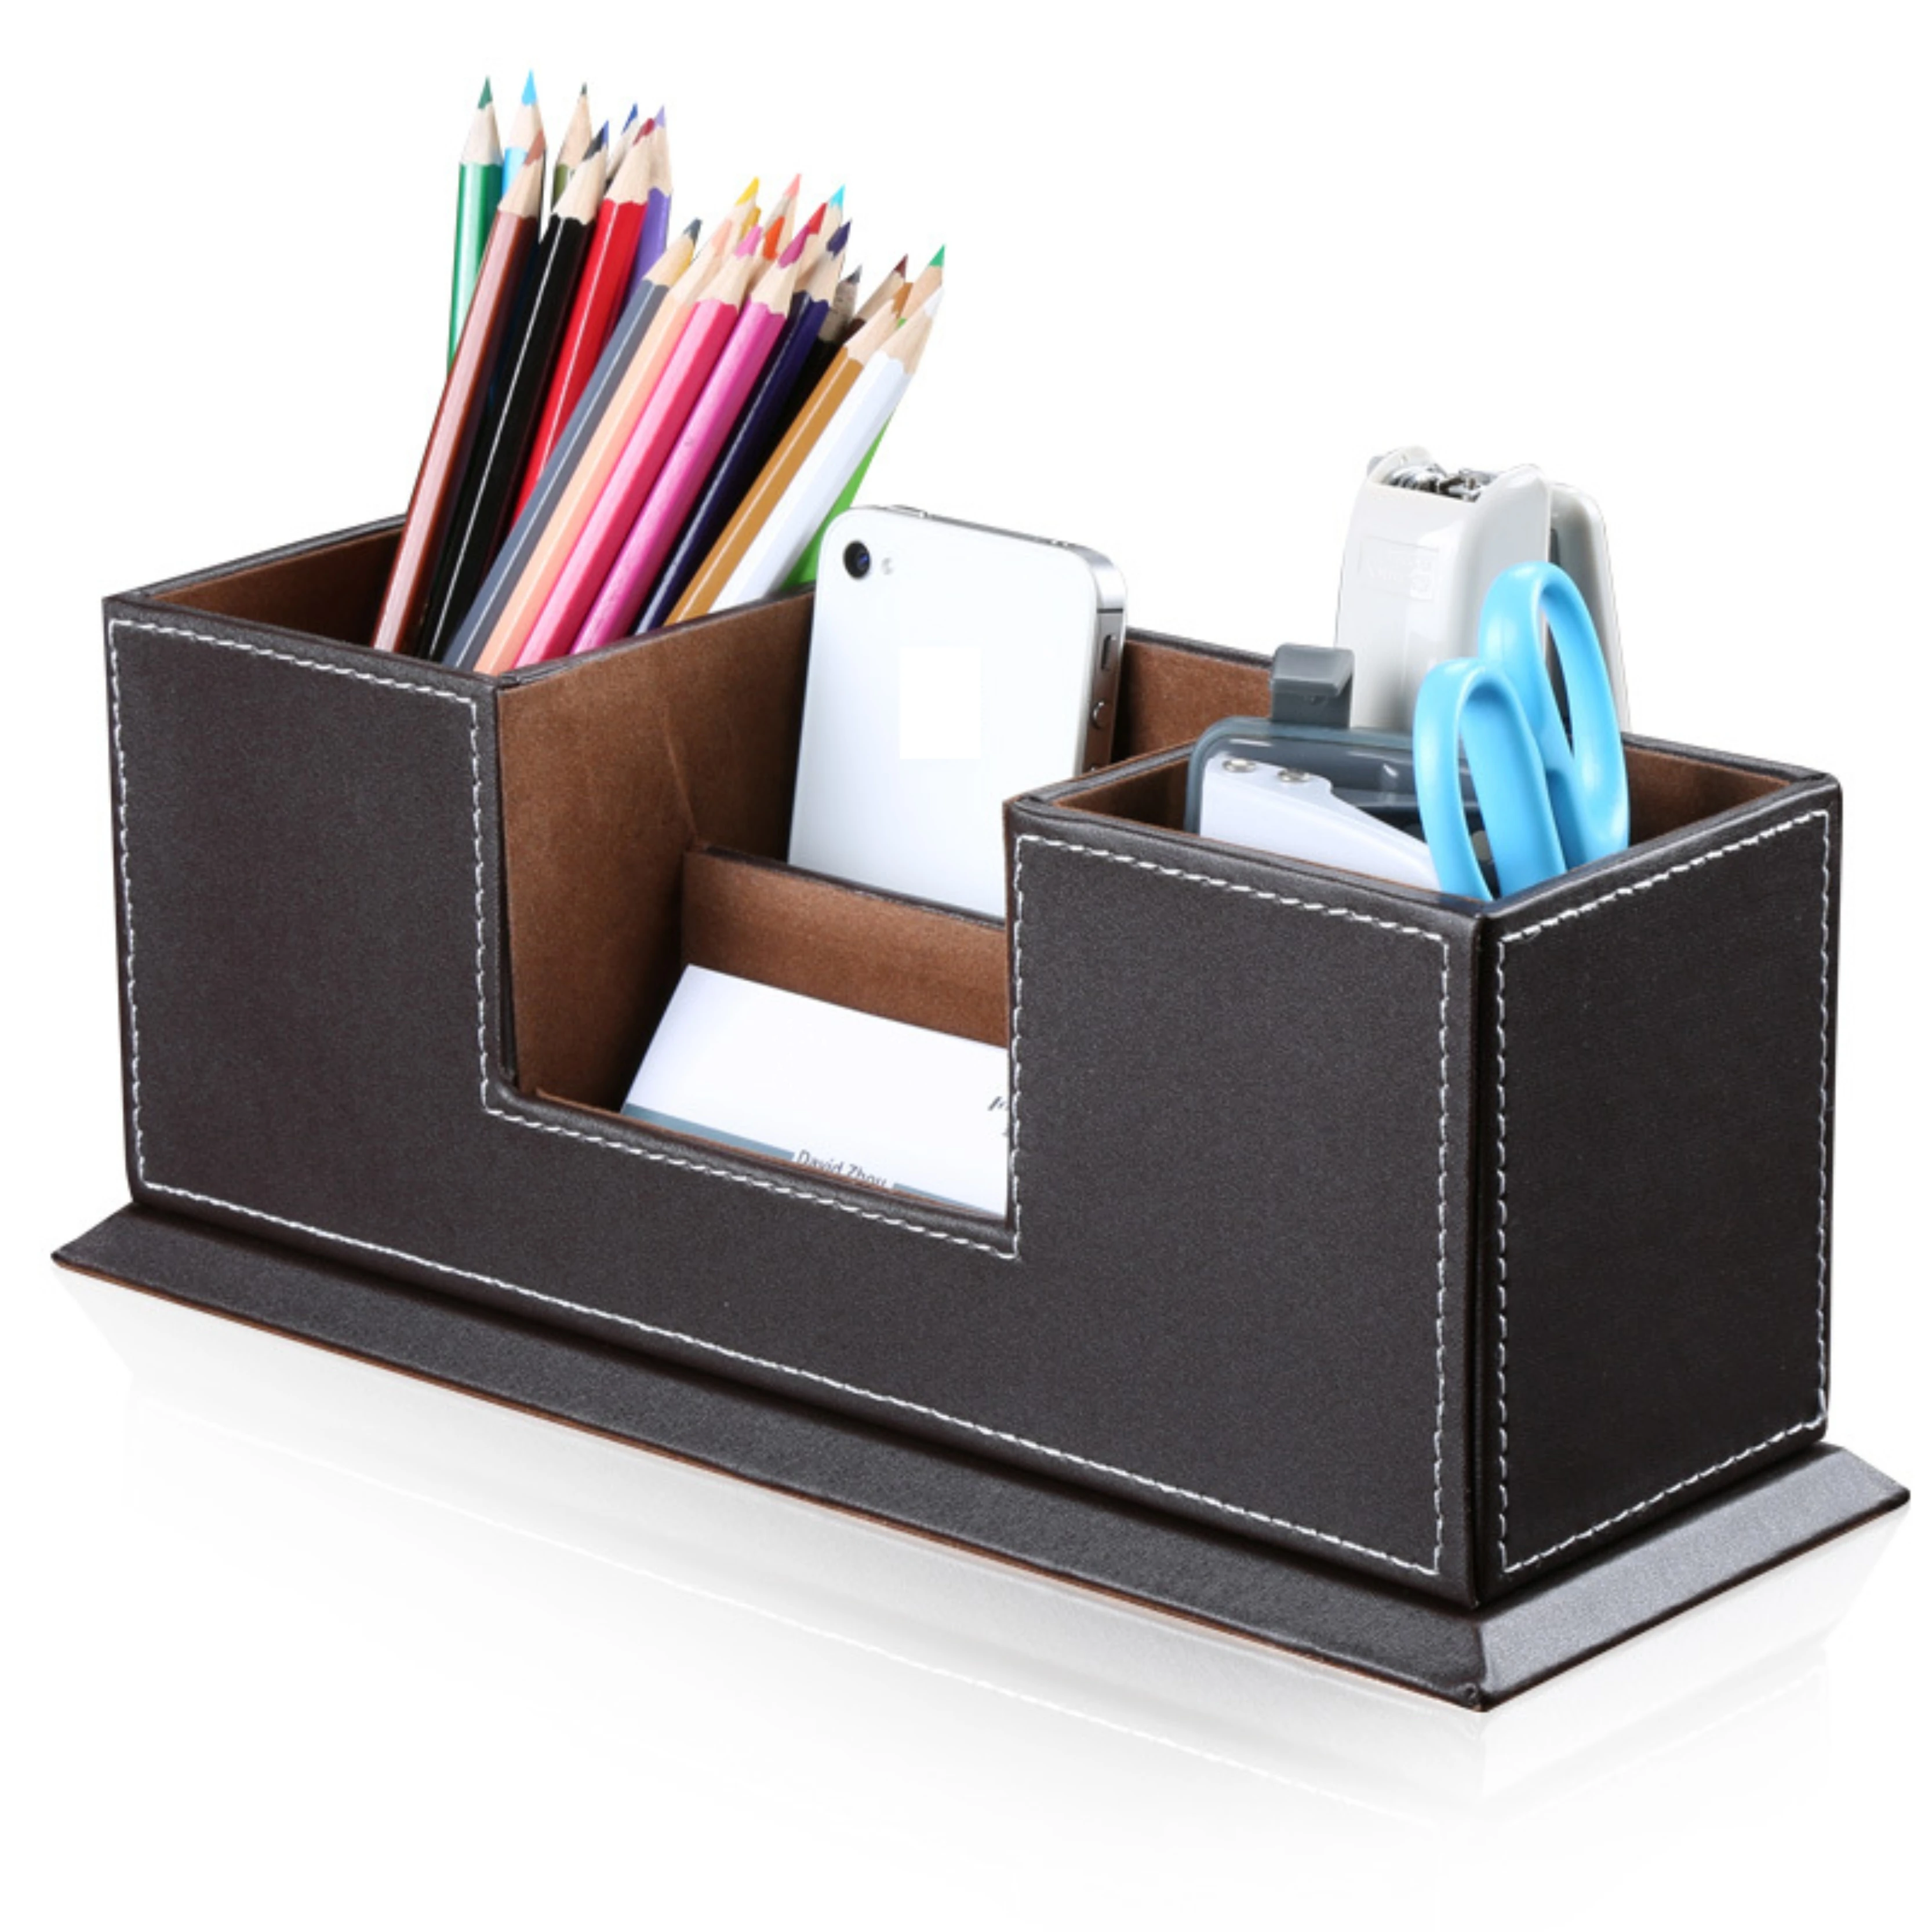 Office supplies stationery leather double pen container multifunctional desktop container container